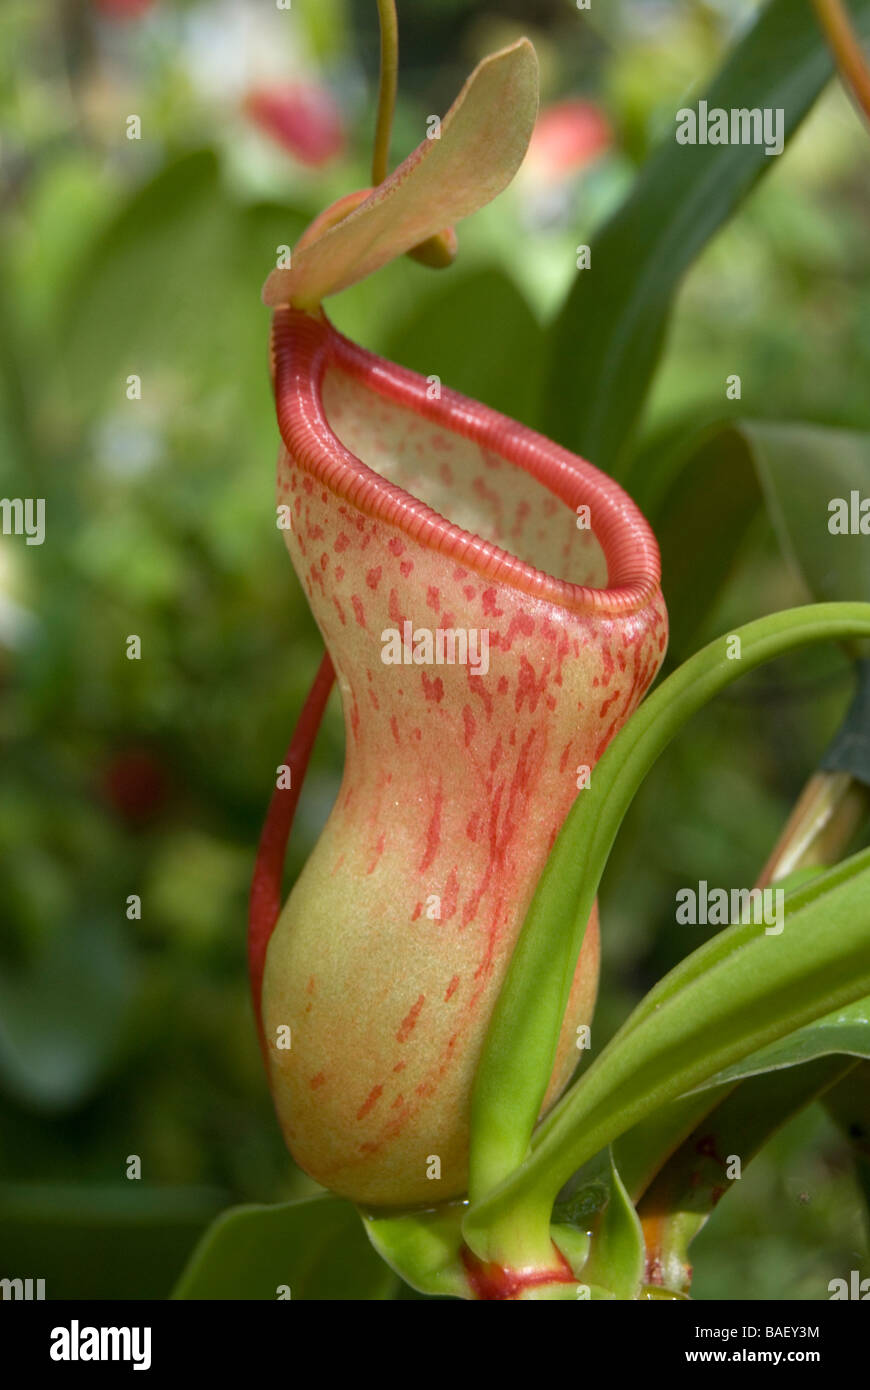 Nepenthes burkei, Pitcher plant Stock Photo